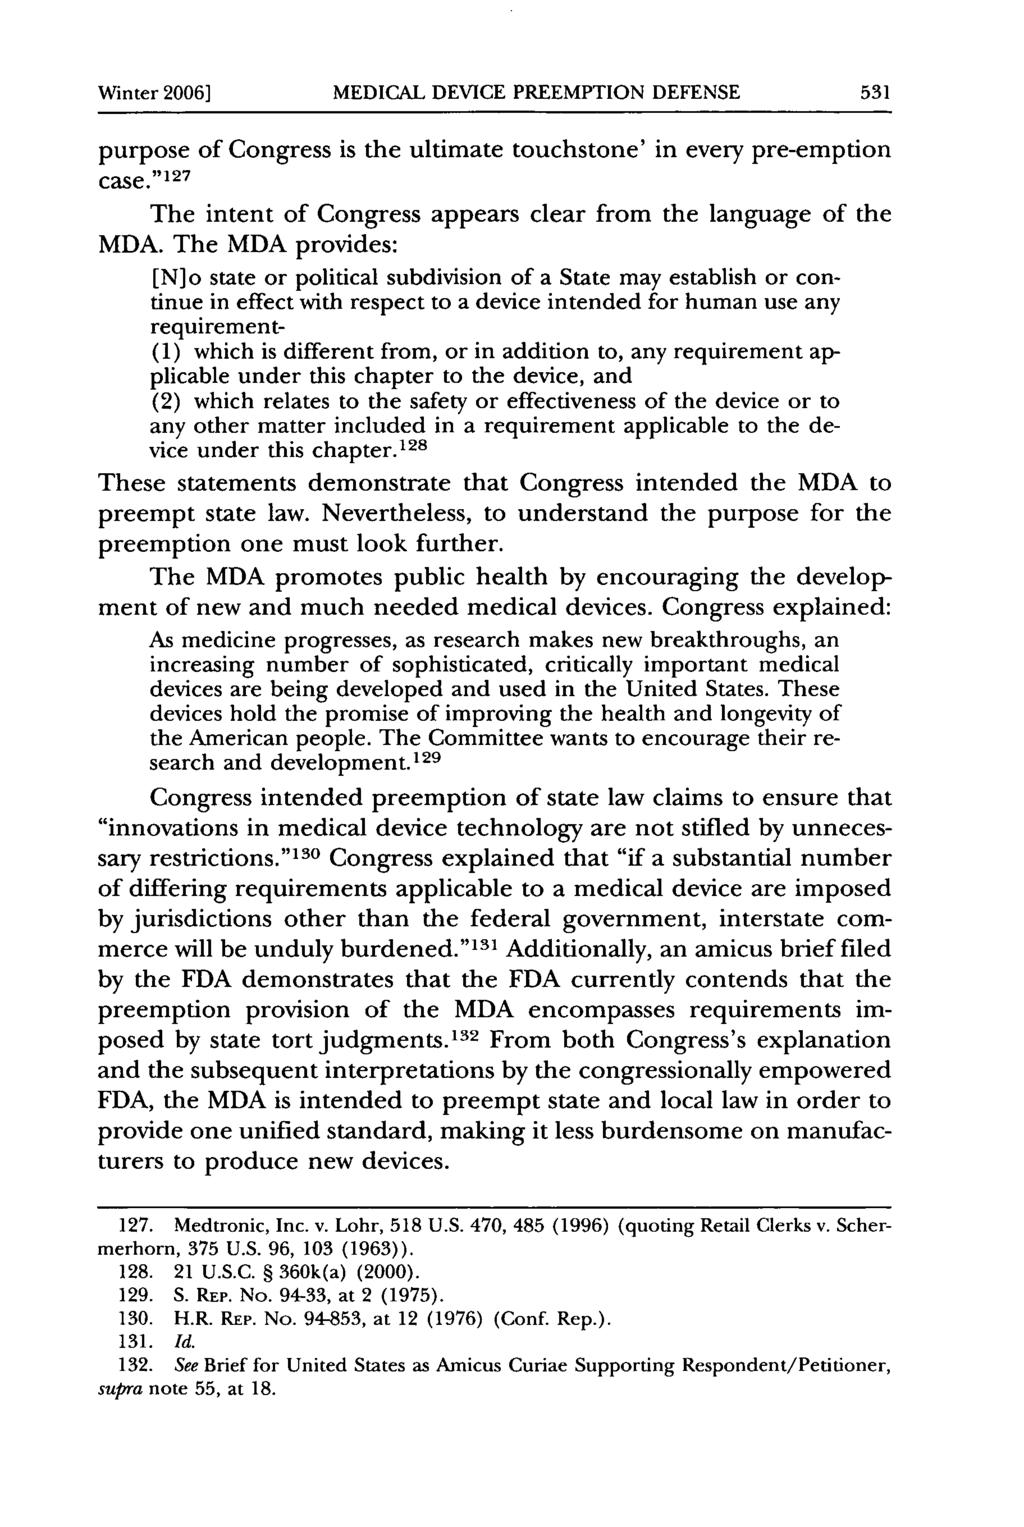 Winter 2006] MEDICAL DEVICE PREEMPTION DEFENSE purpose of Congress is the ultimate touchstone' in every pre-emption case."127 The intent of Congress appears clear from the language of the MDA.